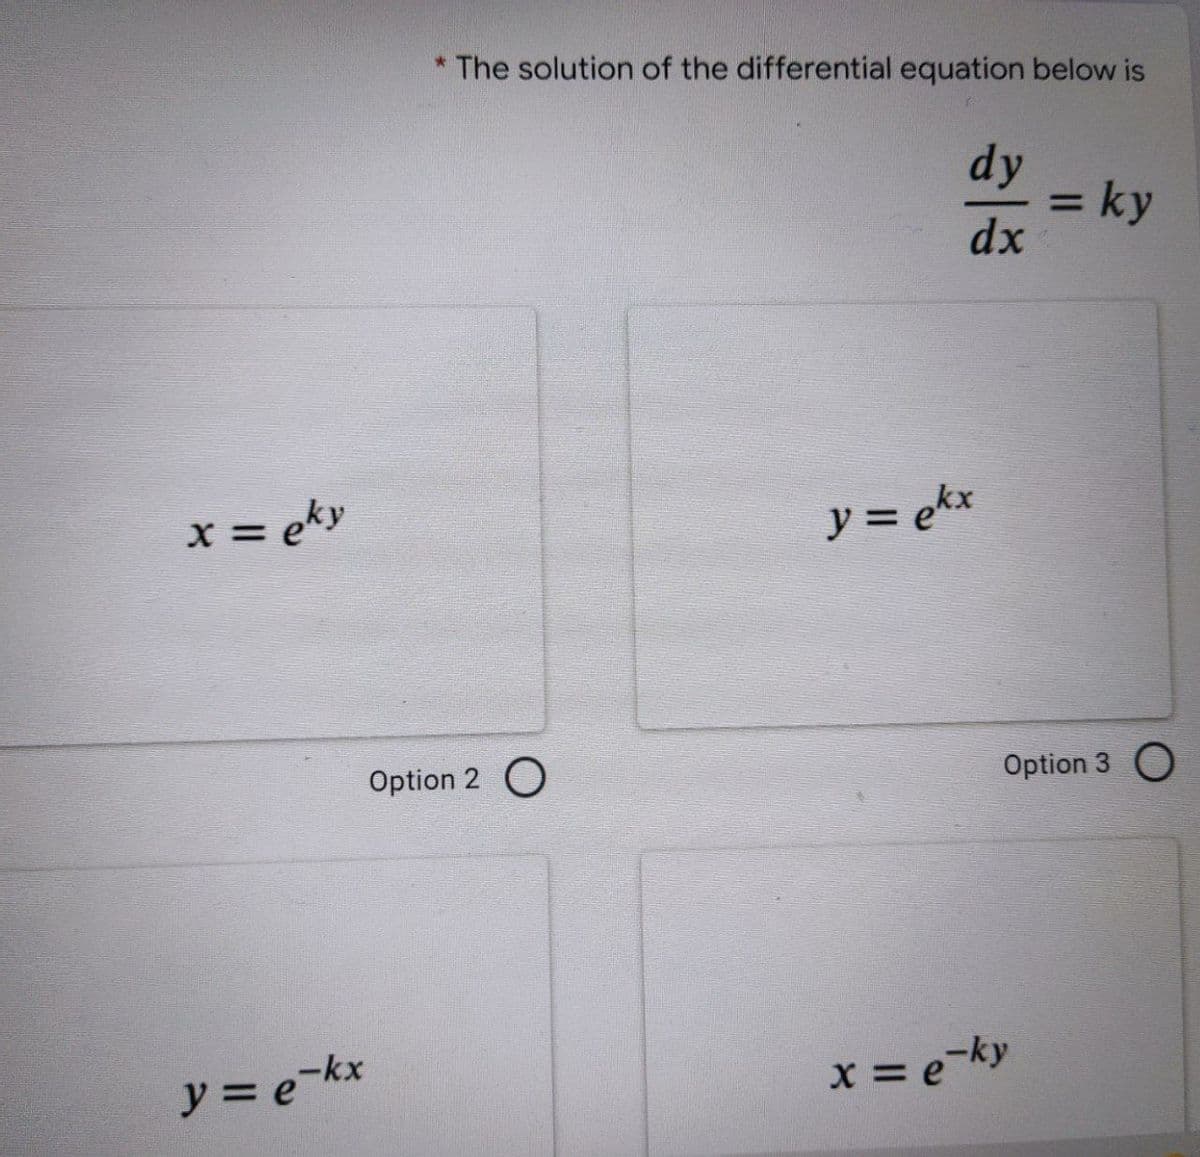 * The solution of the differential equation below is
dy
= ky
dx
%3D
X =
x= eky
ソ= ekx
Option 2 O
Option 3 O
ソミeーkx
x = e-ky
